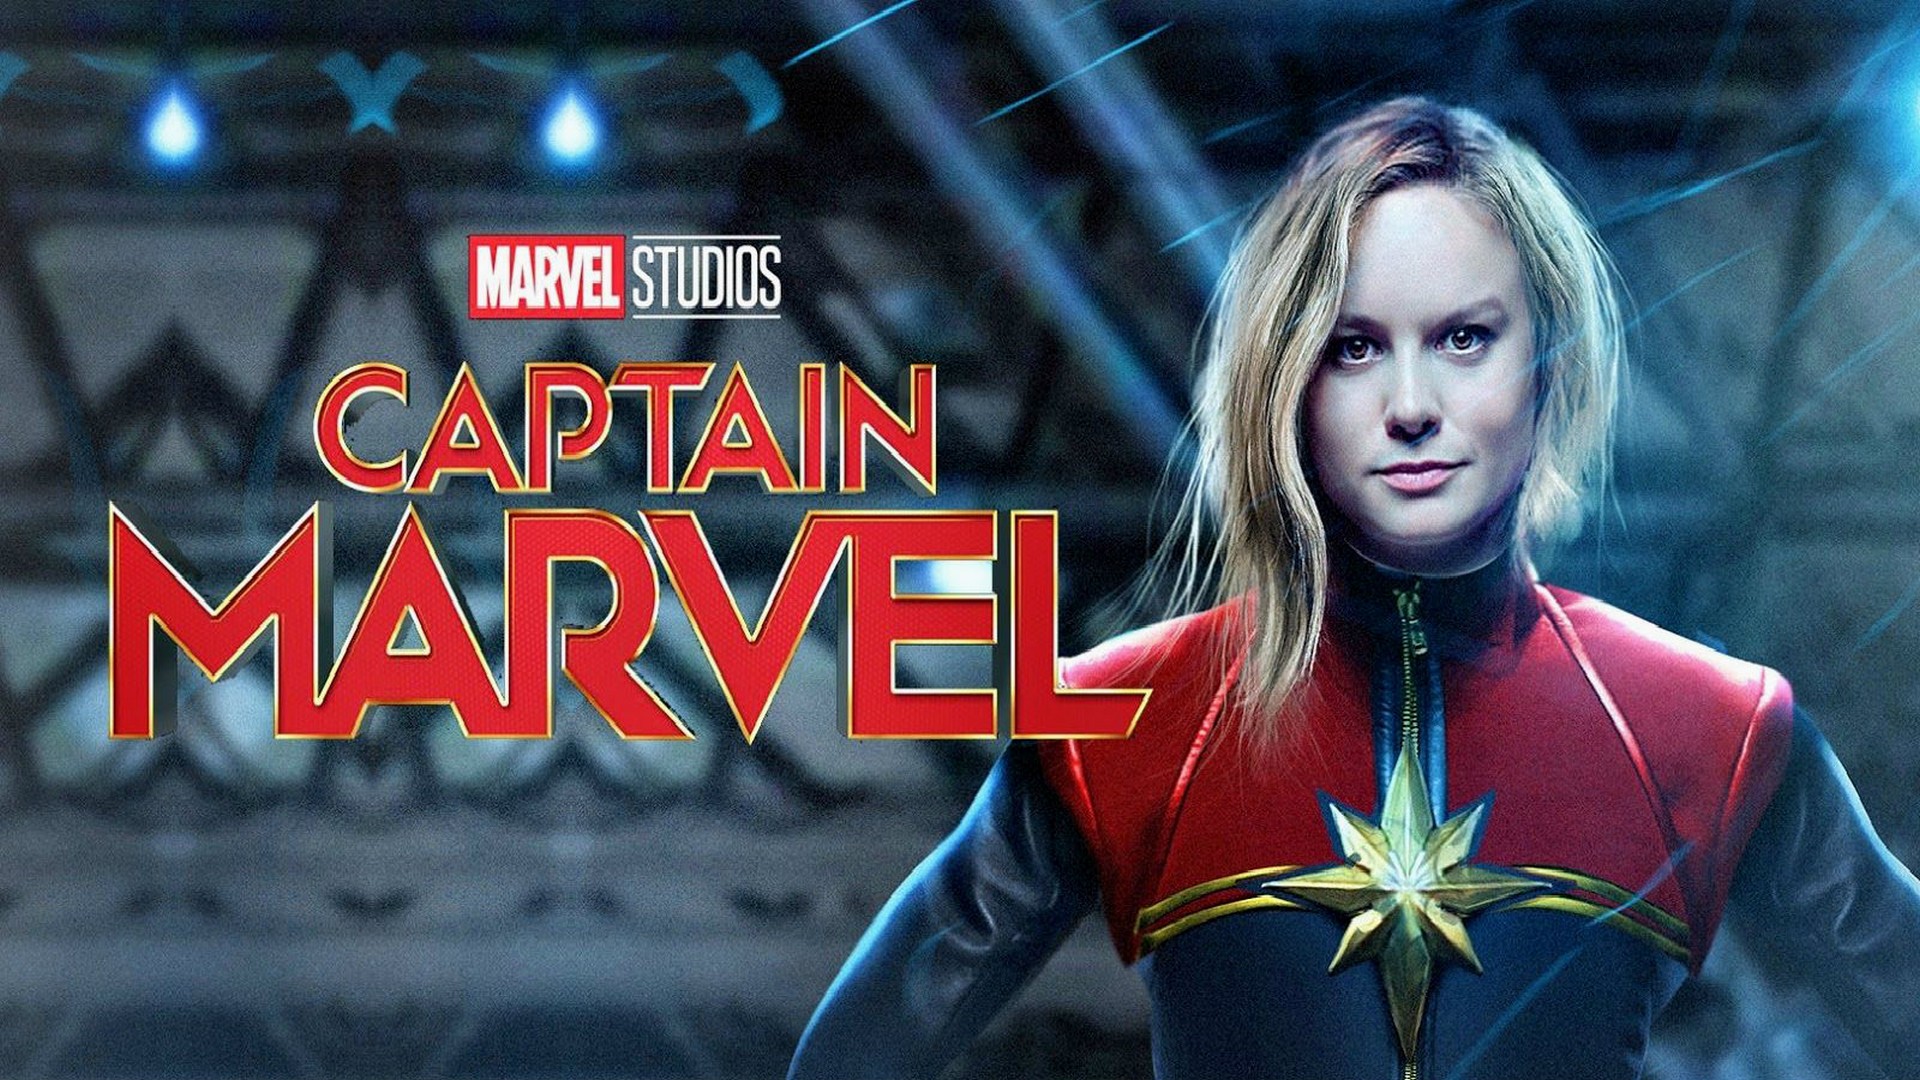 Wallpaper Captain Marvel HD with high-resolution 1920x1080 pixel. You can use this wallpaper for your Desktop Computer Backgrounds, Mac Wallpapers, Android Lock screen or iPhone Screensavers and another smartphone device